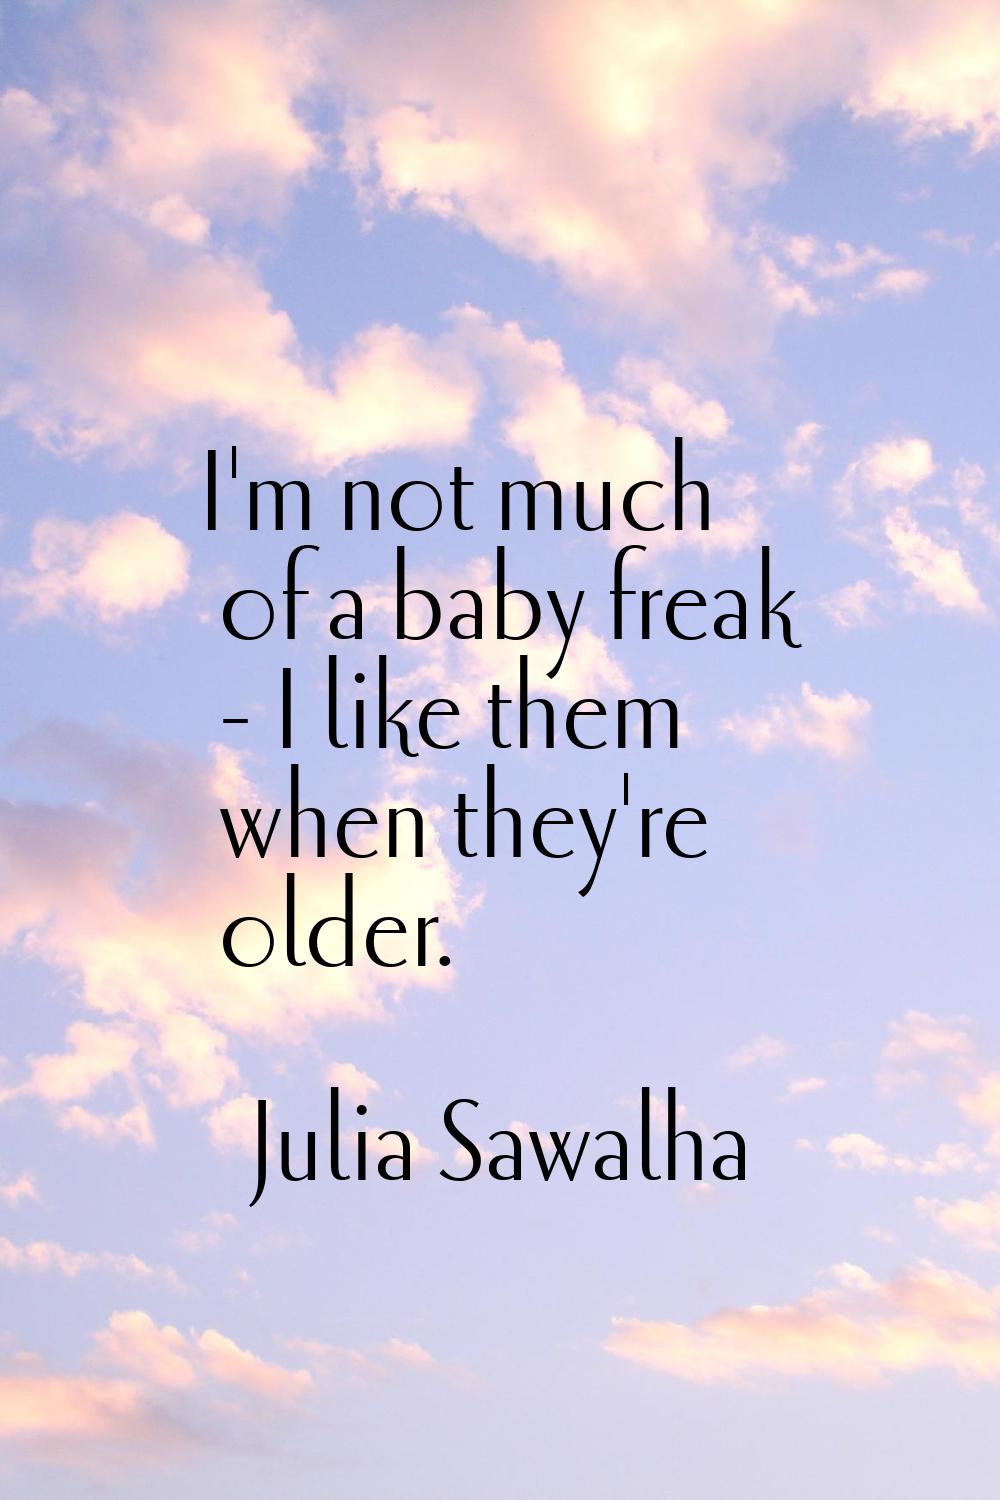 I'm not much of a baby freak - I like them when they're older.